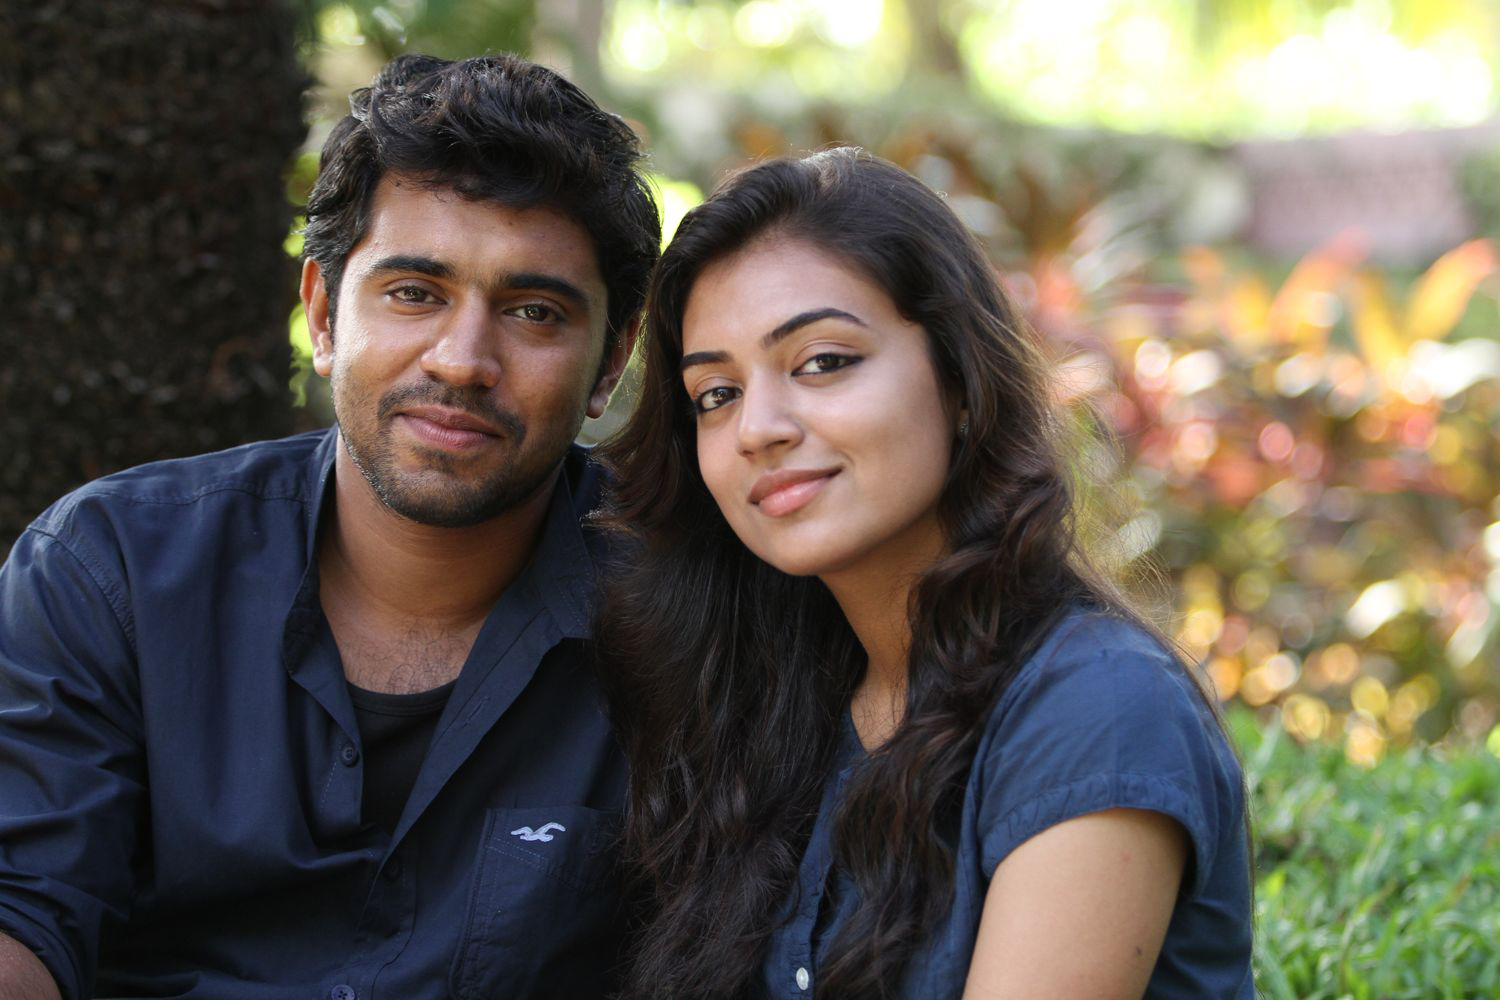 Best Of Neram Movie Image with Love Quotes. Love quotes collection within HD image